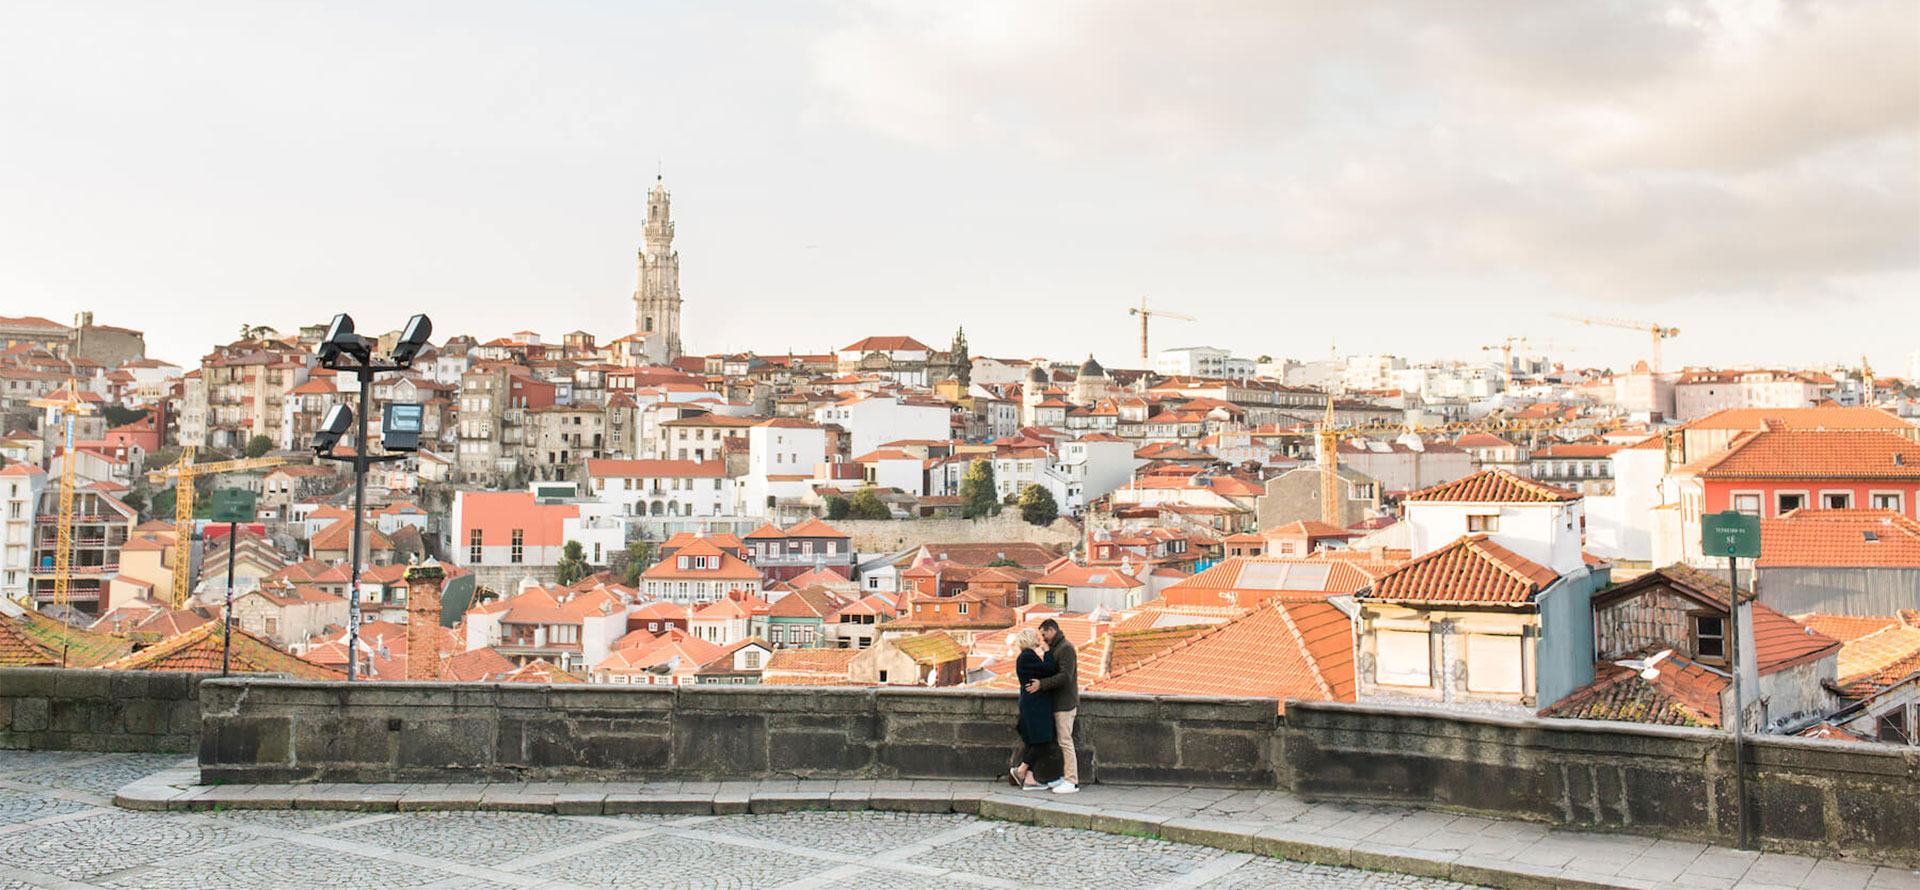 Couple at city in Portugal.